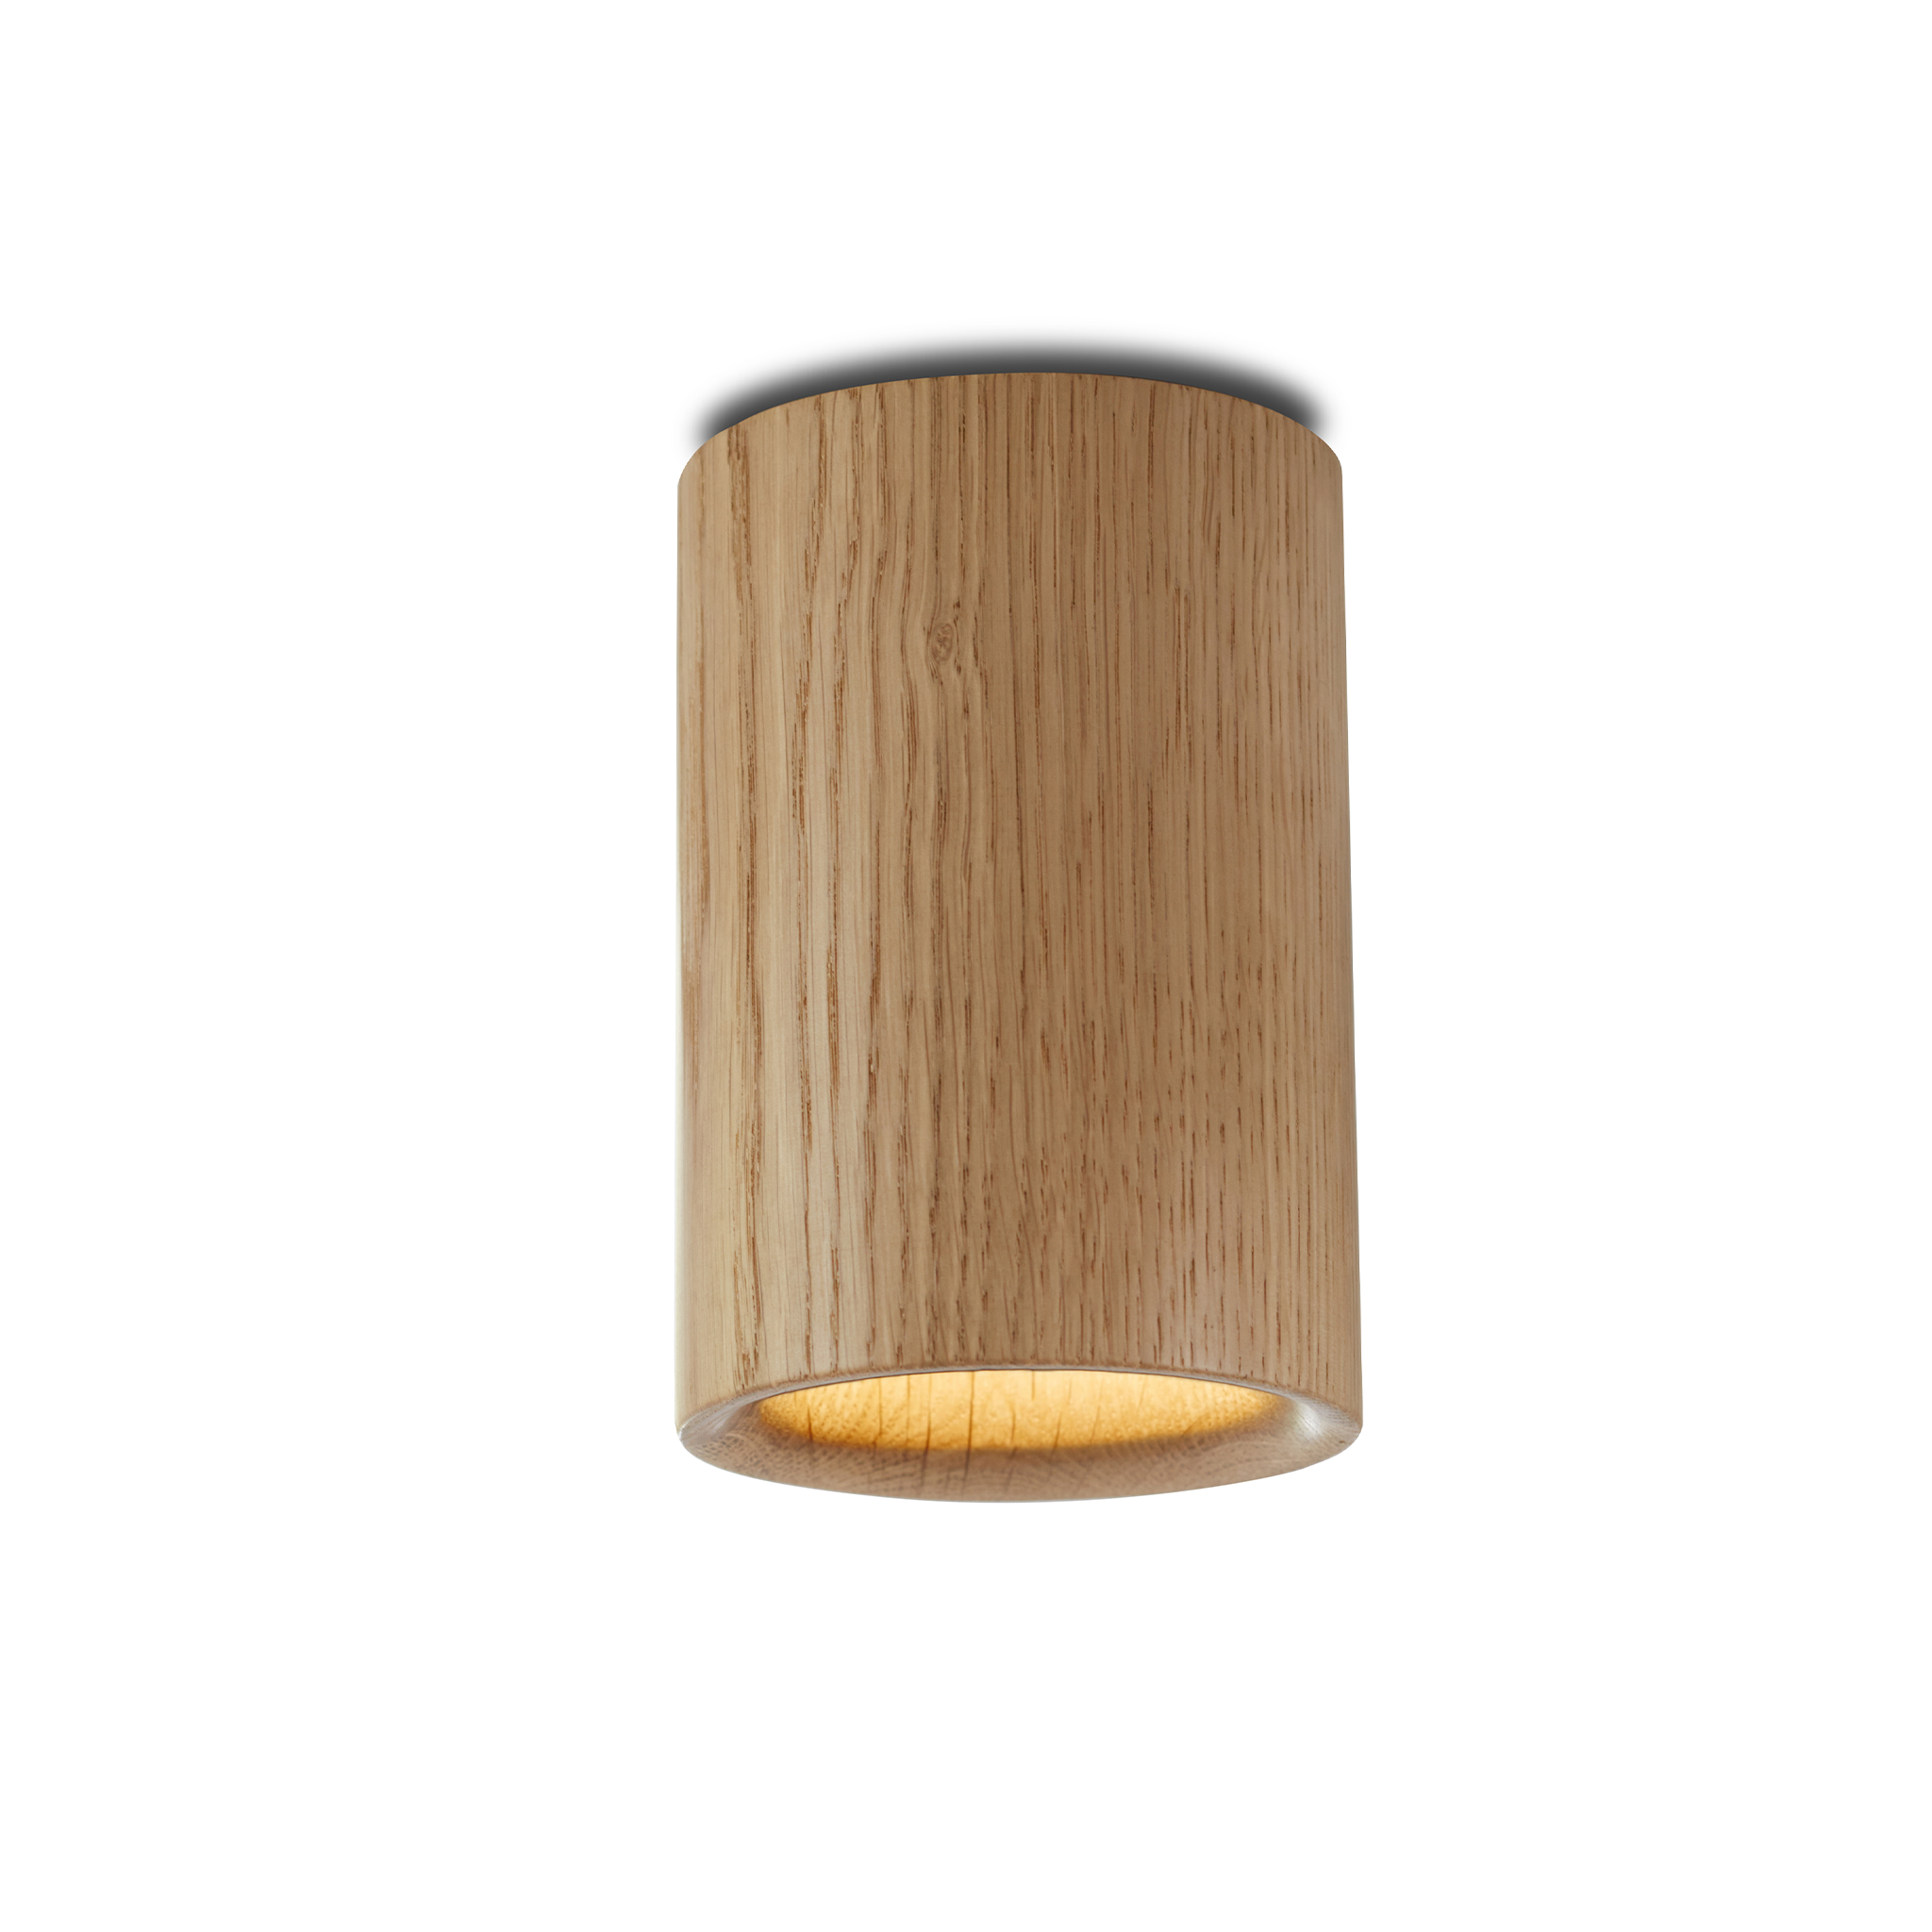 Solid Downlight Cylinder - Wood by Terence Woodgate